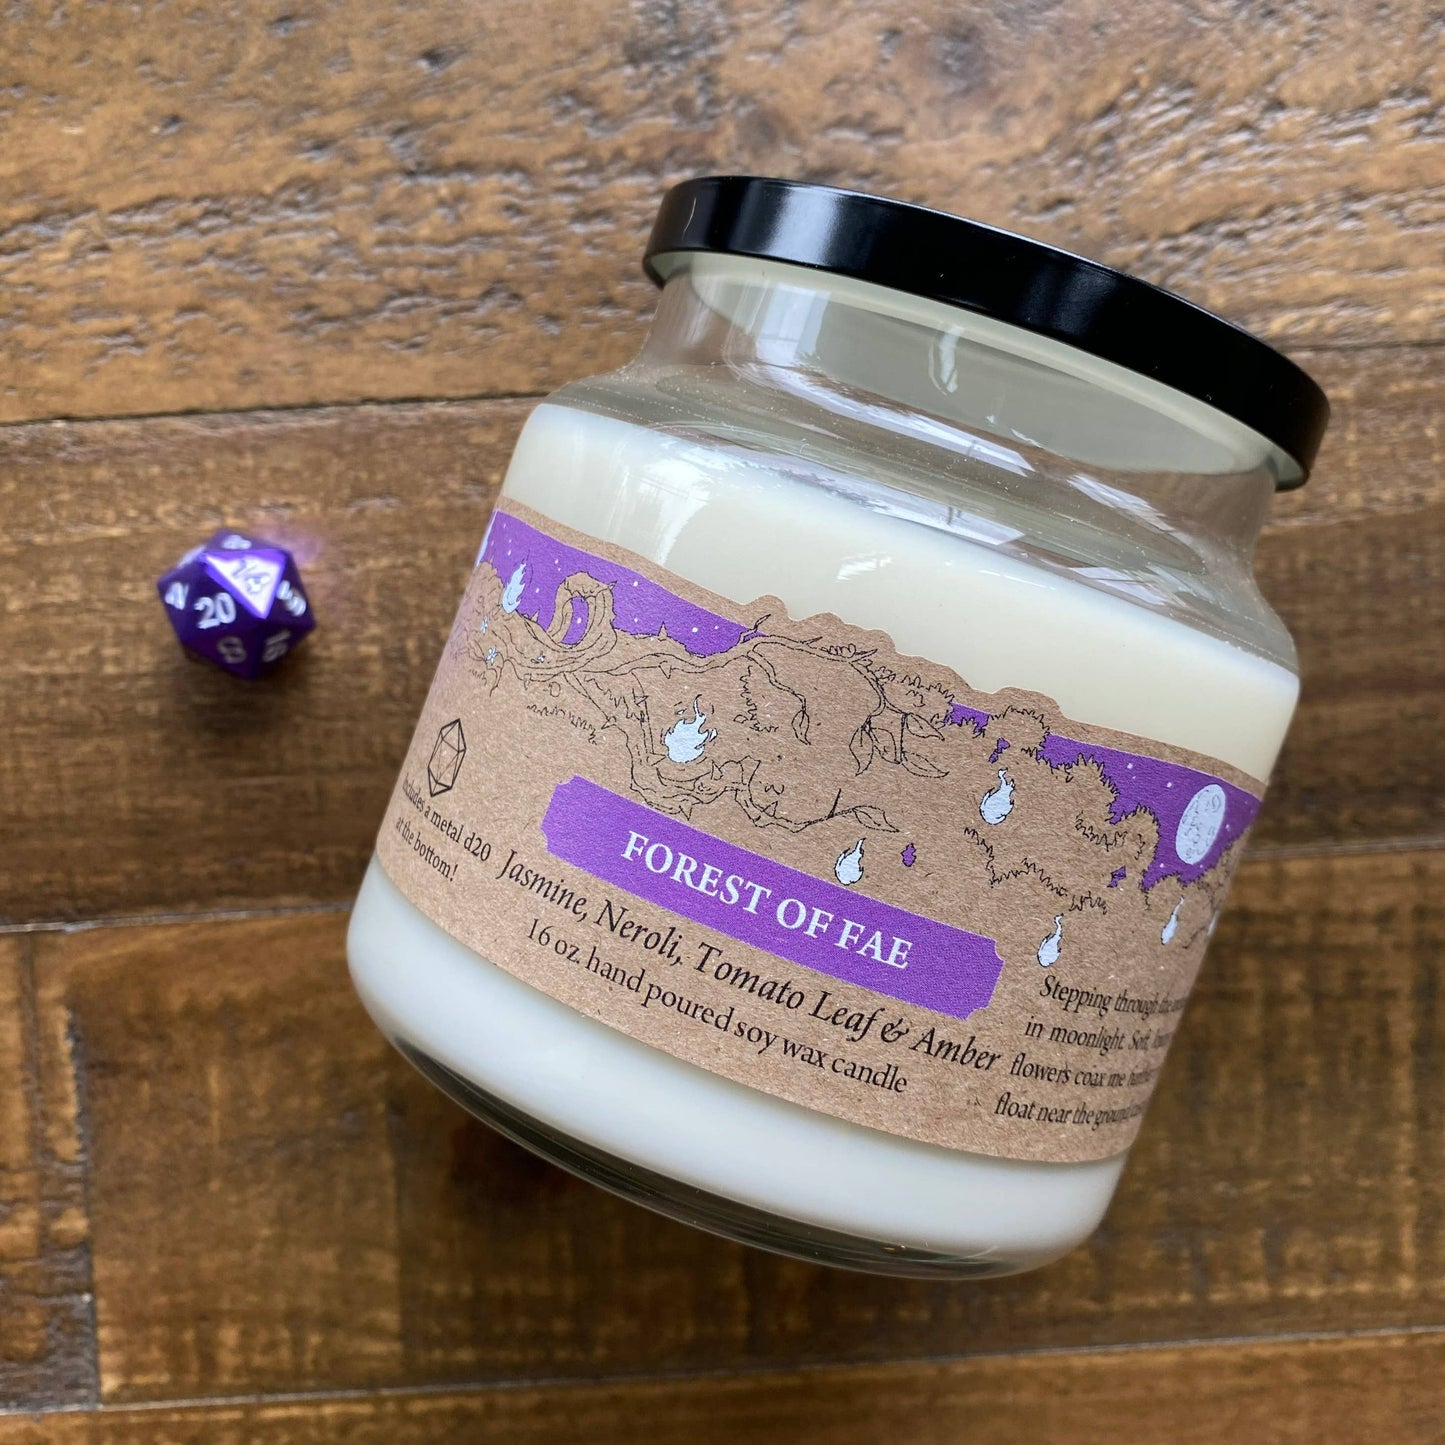 16oz Candle Forest of Fae